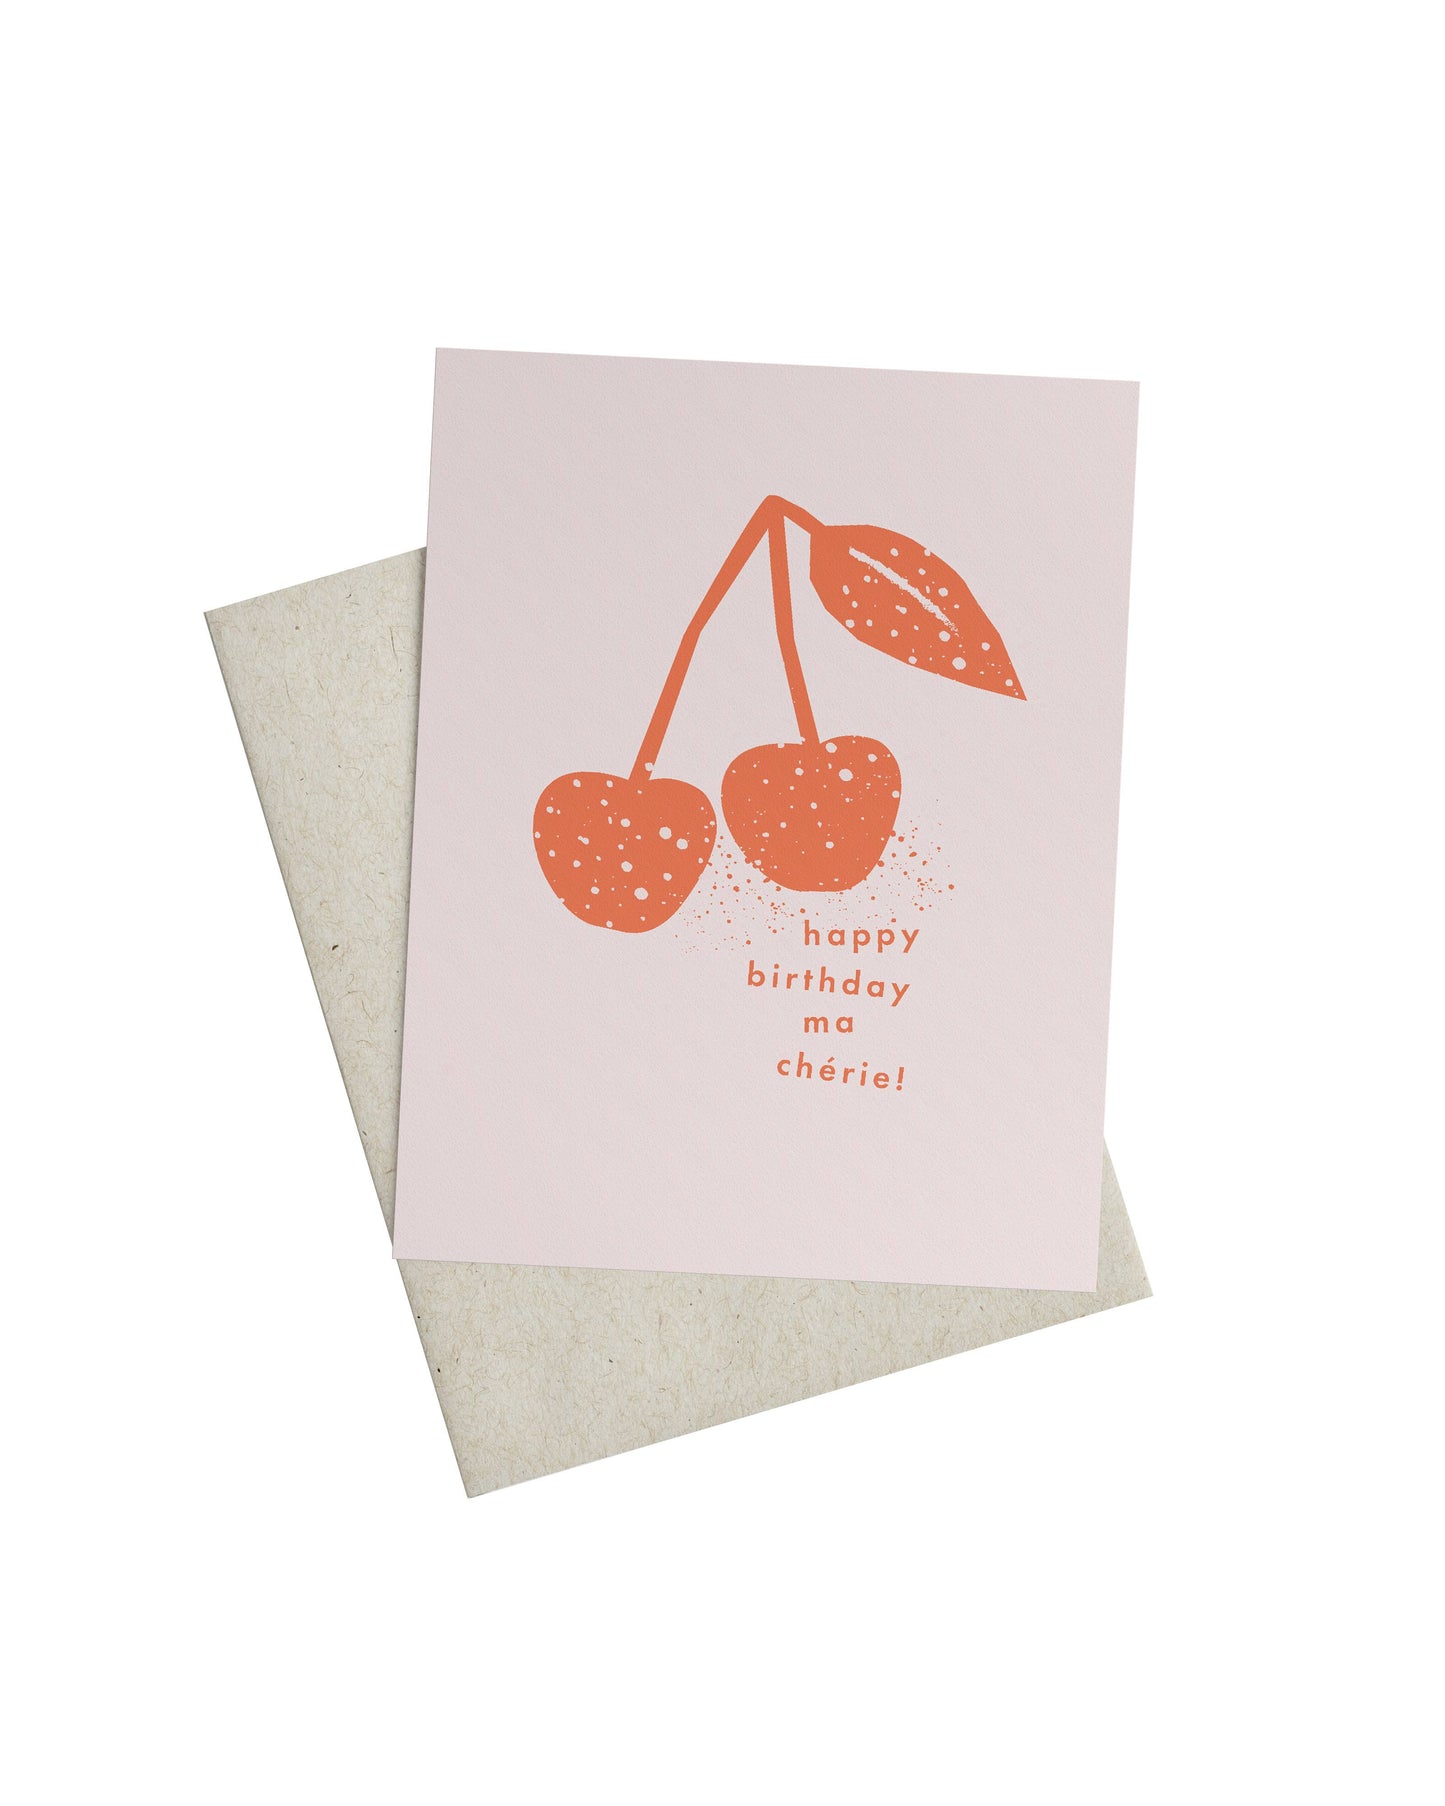 Happy Birthday ma Chérie! This card has a par of cherries on the cover in red on pink paper.